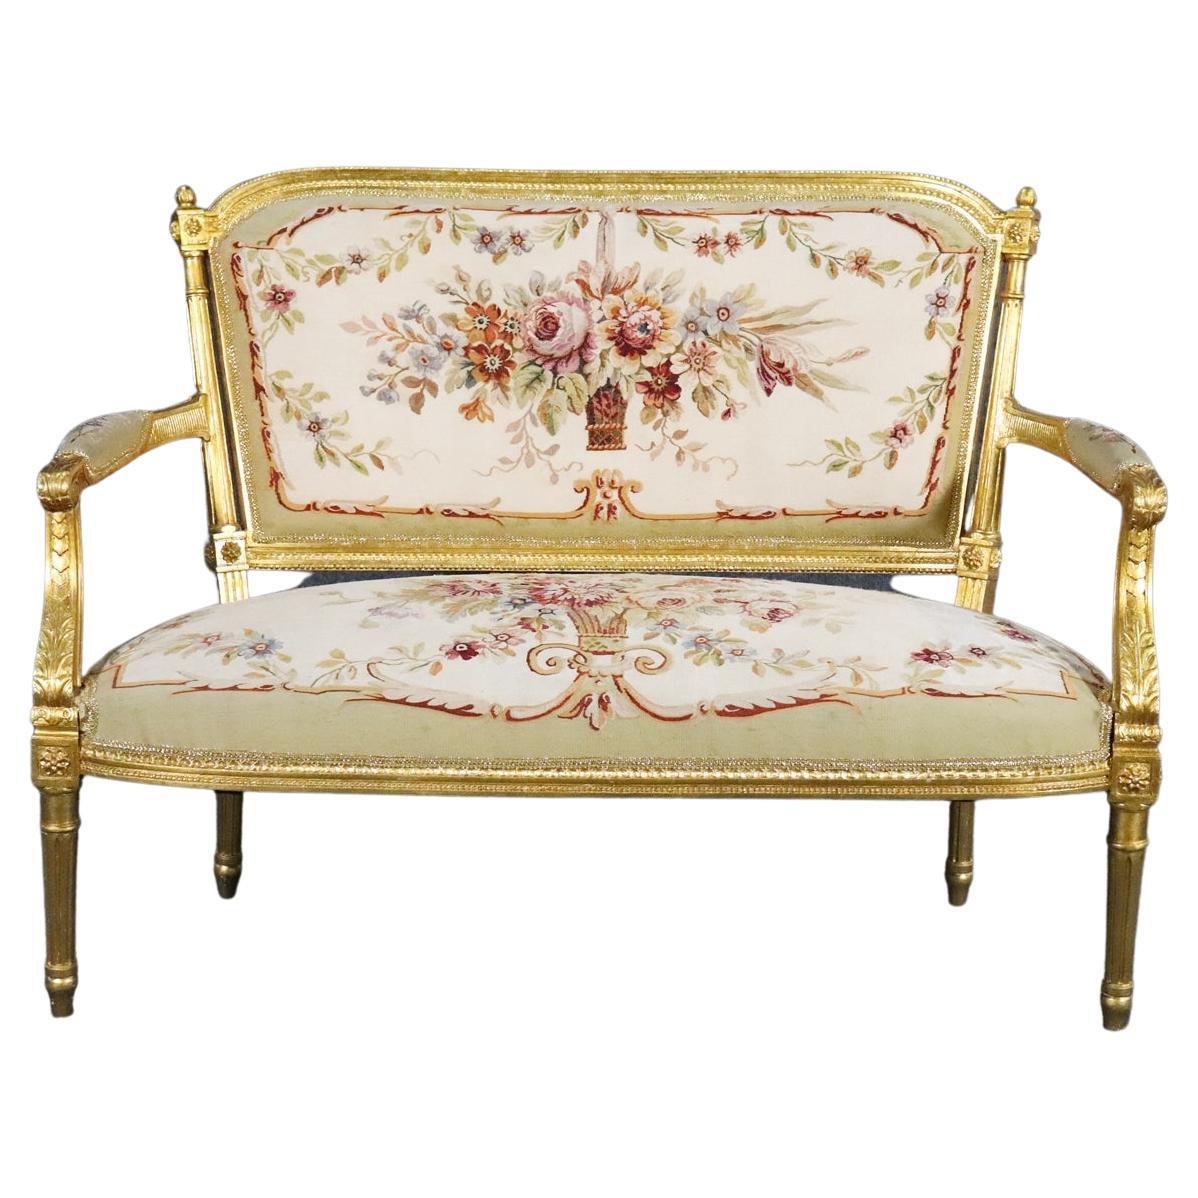 Louis XVI Gilded French Aubusson Upholstered Canape Settee Circa 1920s